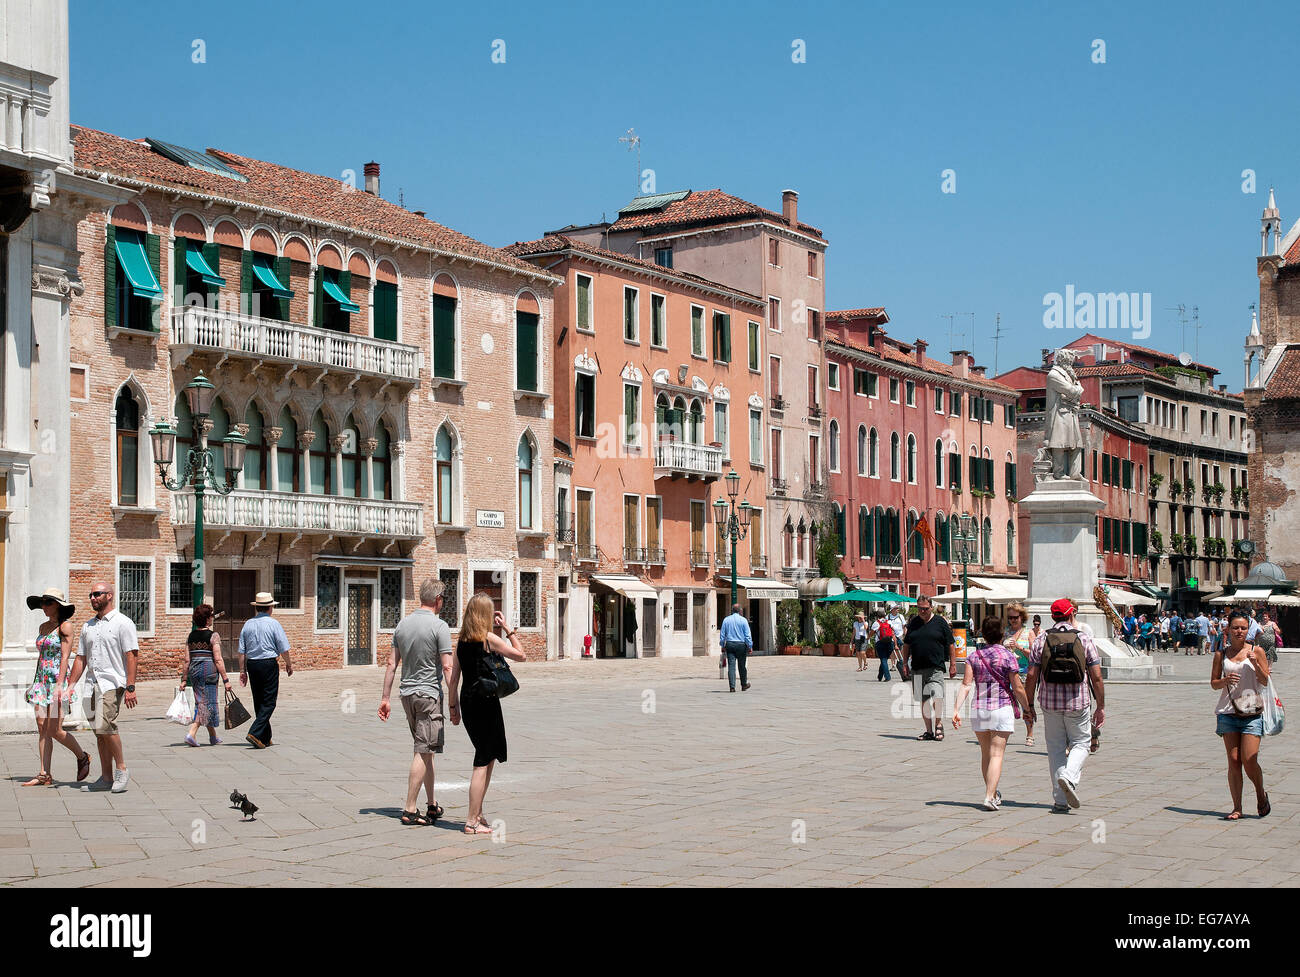 People in summer clothes enjoying June sunshine in Campo San Stefano Venice Italy  Statue of Niccolo Tommaseo is in the square Stock Photo